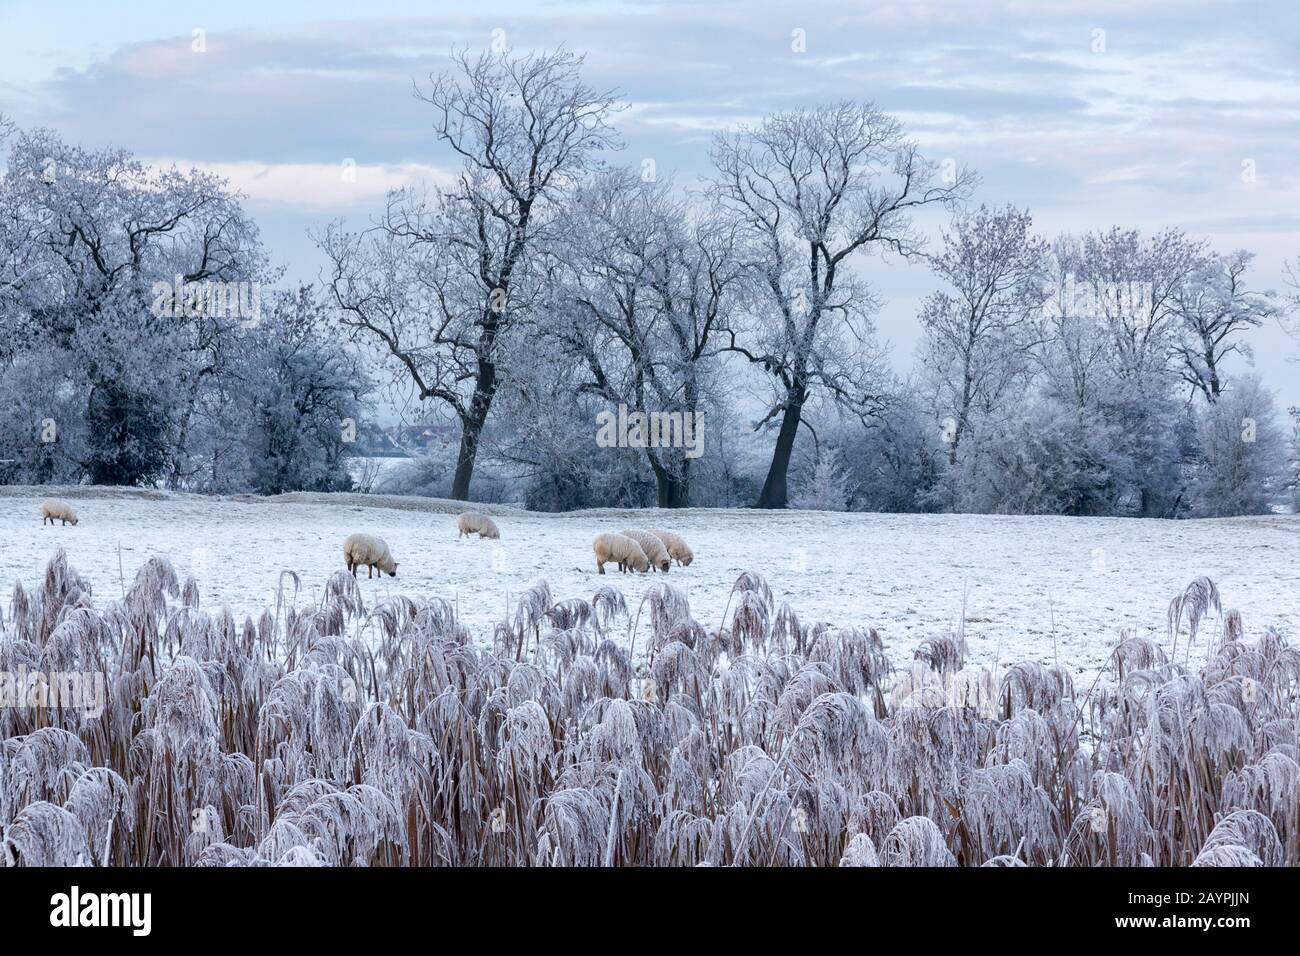 Winter scene with hoar frost covered reeds in the foreground and sheep grazing in a snowy farm field beyond, Leicestershire, UK Stock Photo